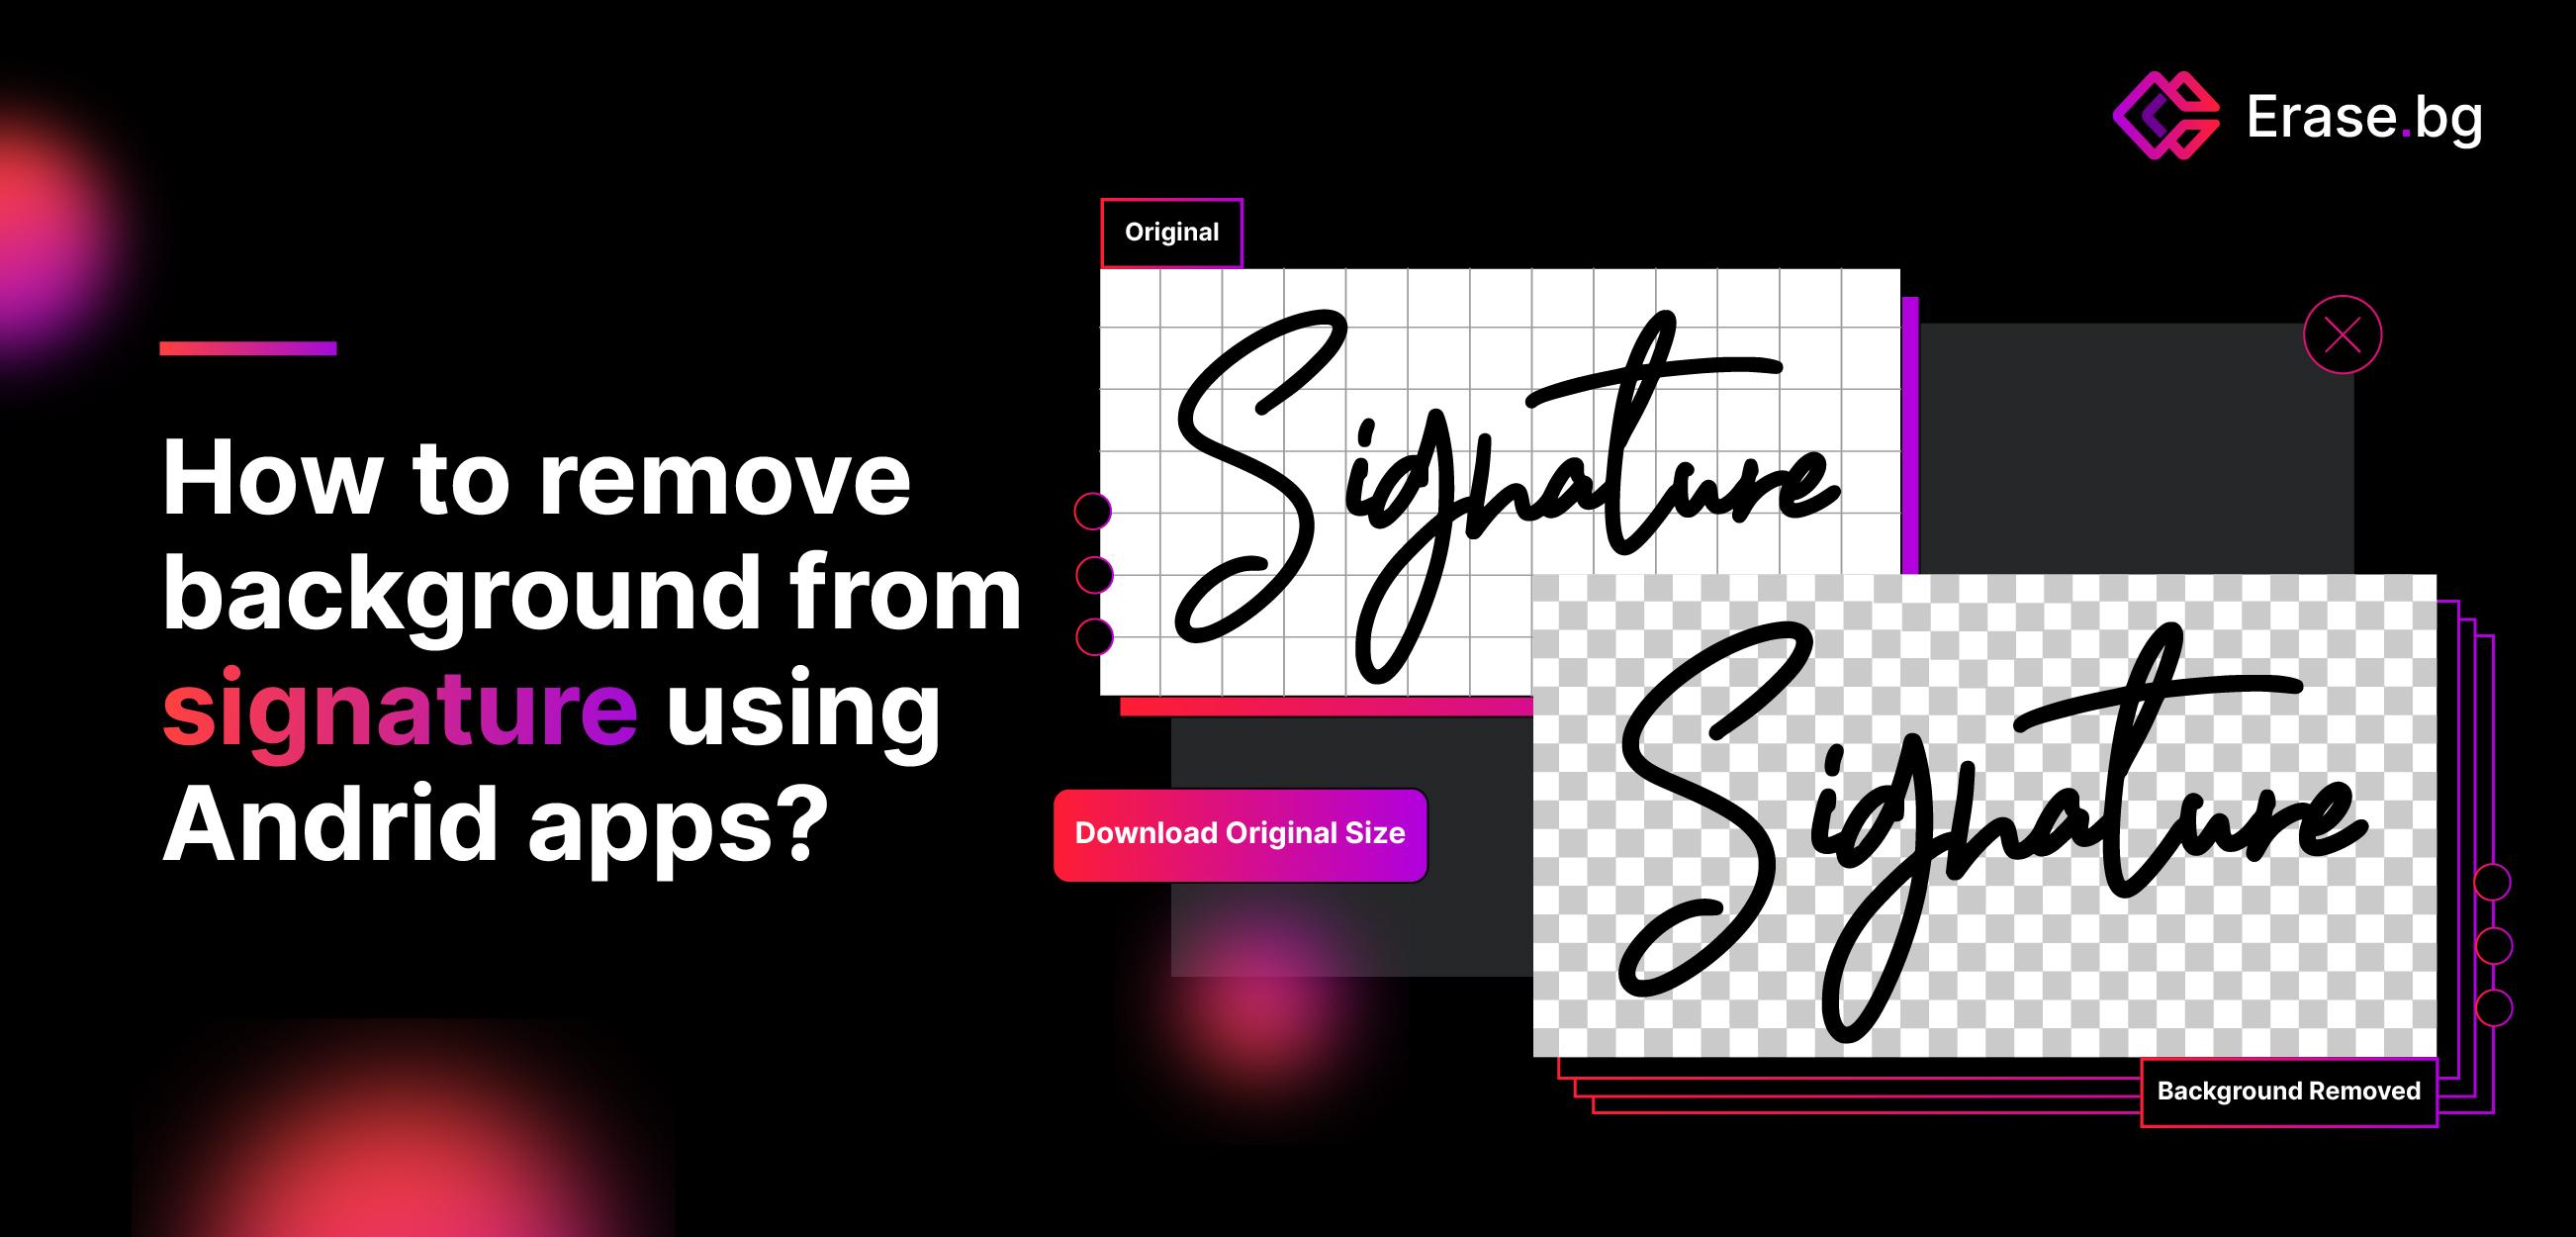 How to Remove Background from Signature Using Android Apps?